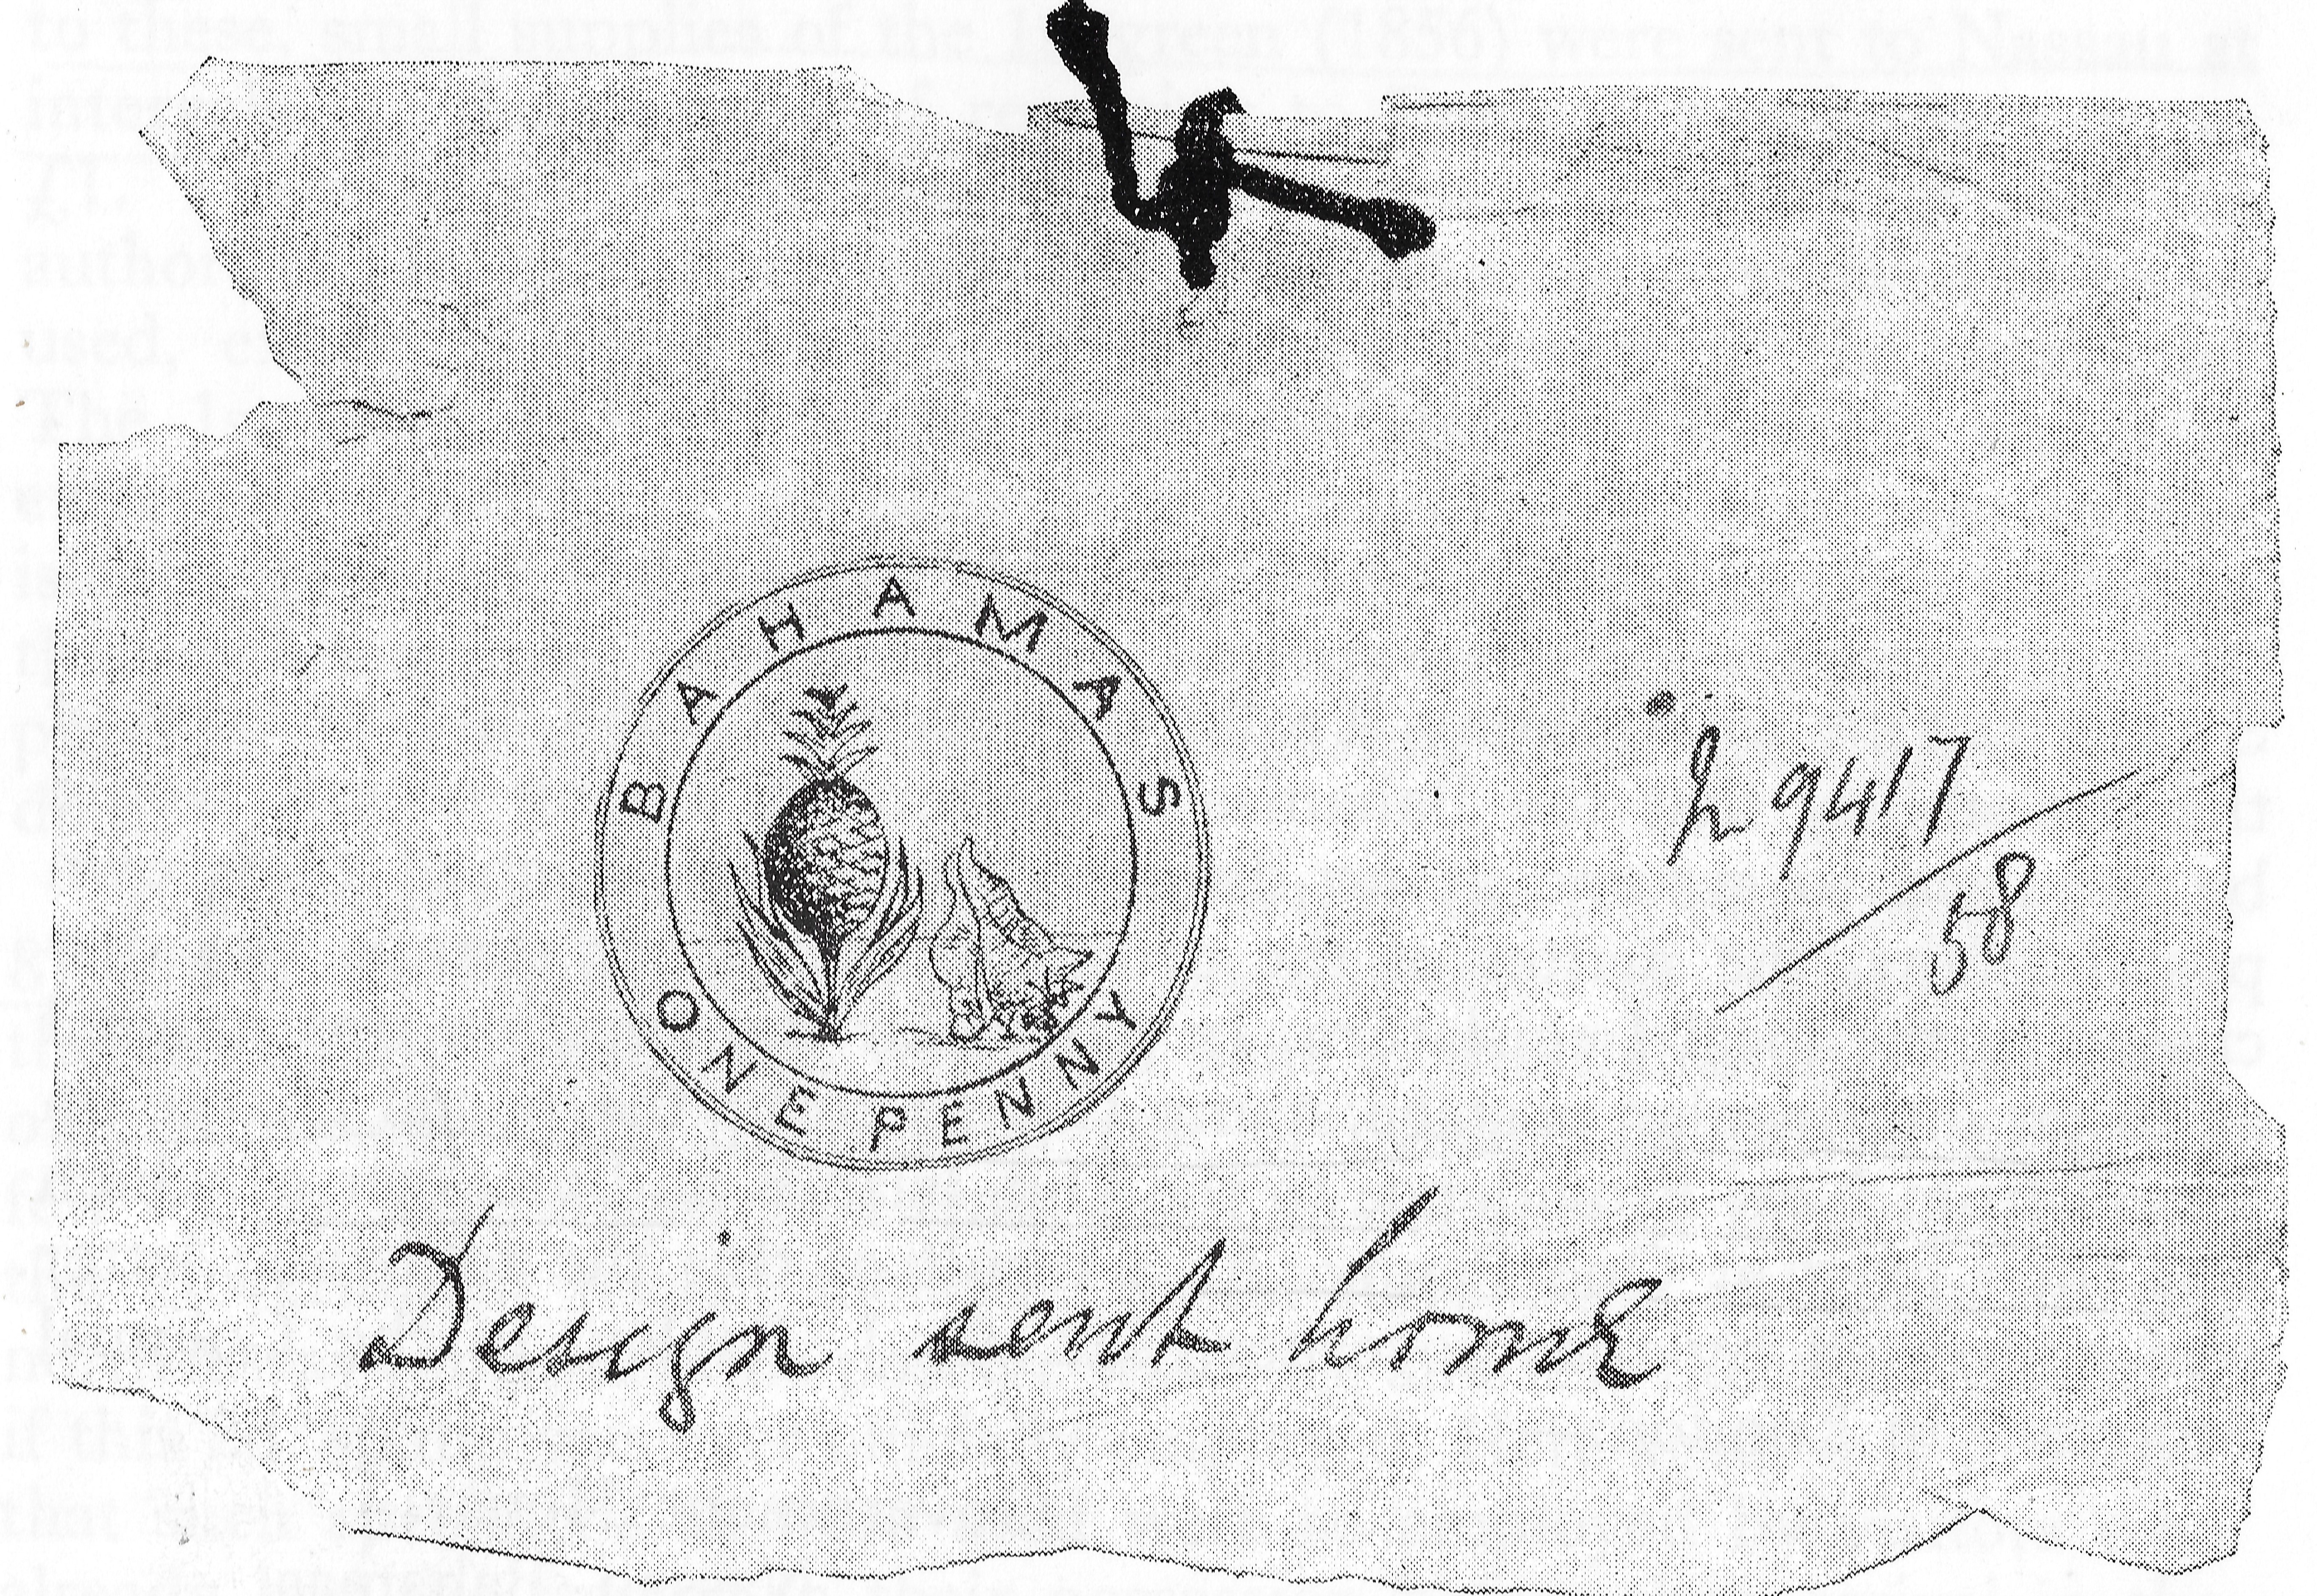 Original Stamp Design by Colonial Government